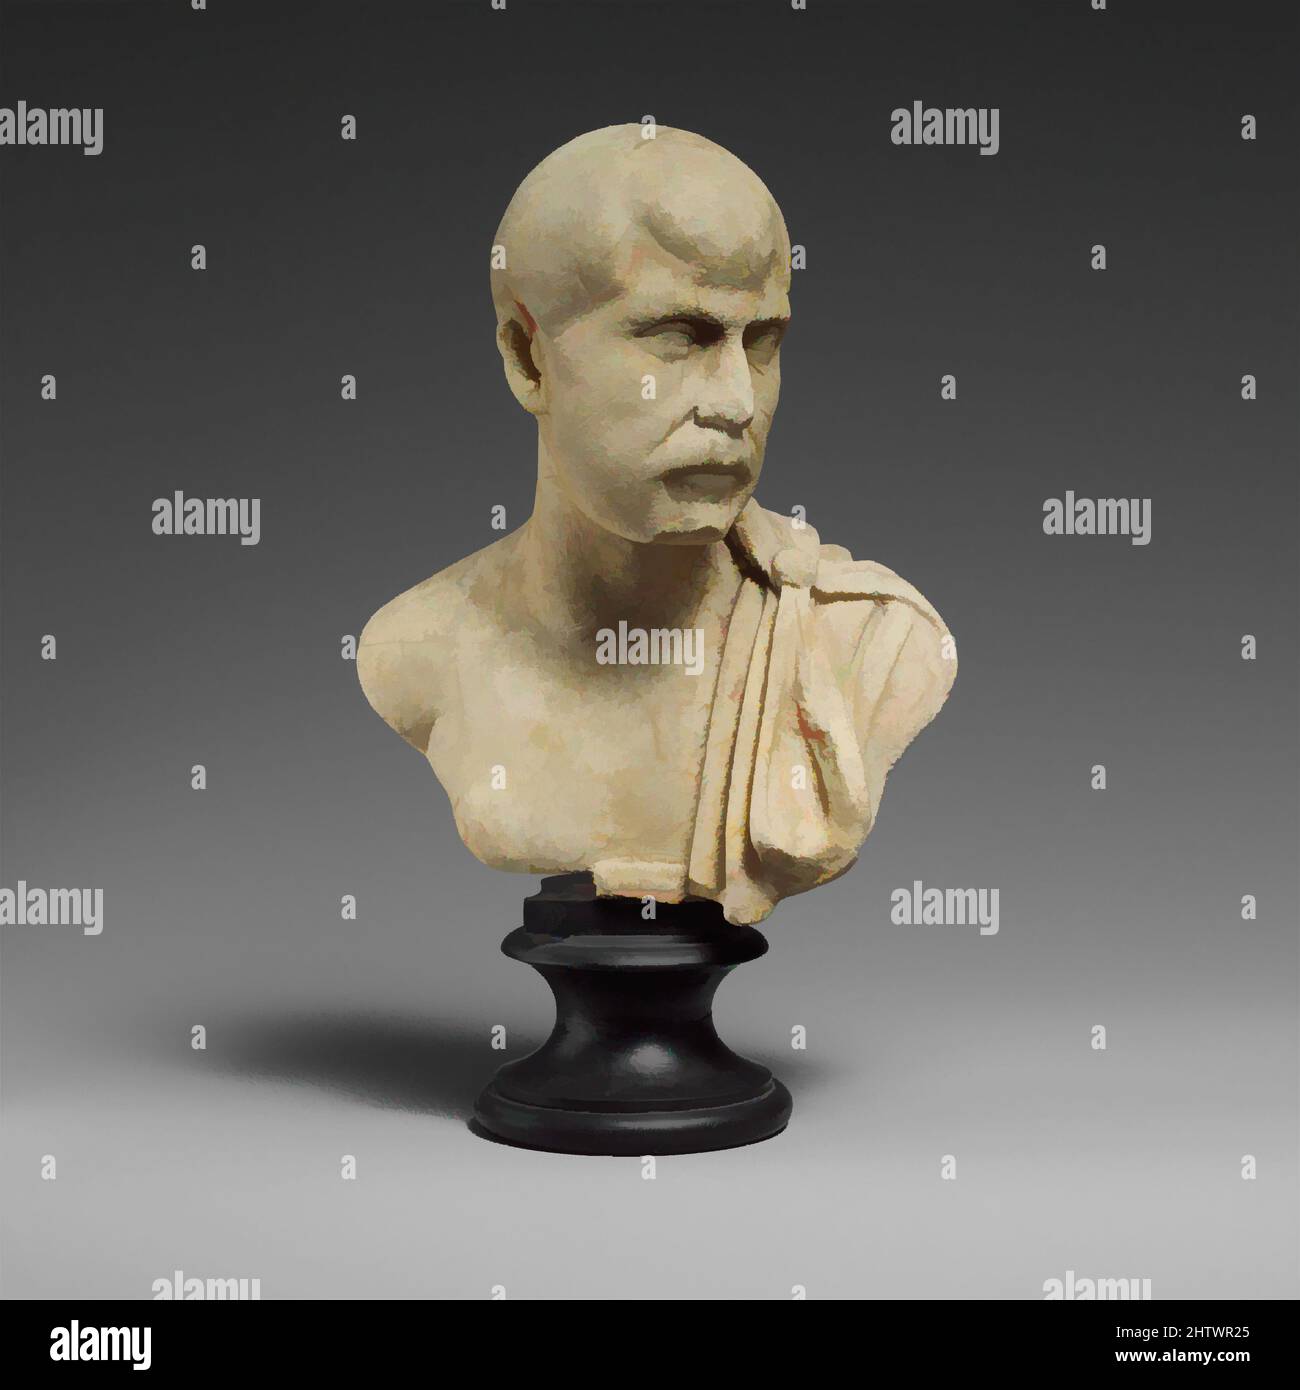 Art inspired by Marble bust of a man, Late Imperial, 3rd century A.D.,  Roman, Marble, H. 7 3/4 in. (19.7 cm), Stone Sculpture, Beardless man with  cloak on left shoulder. The barely